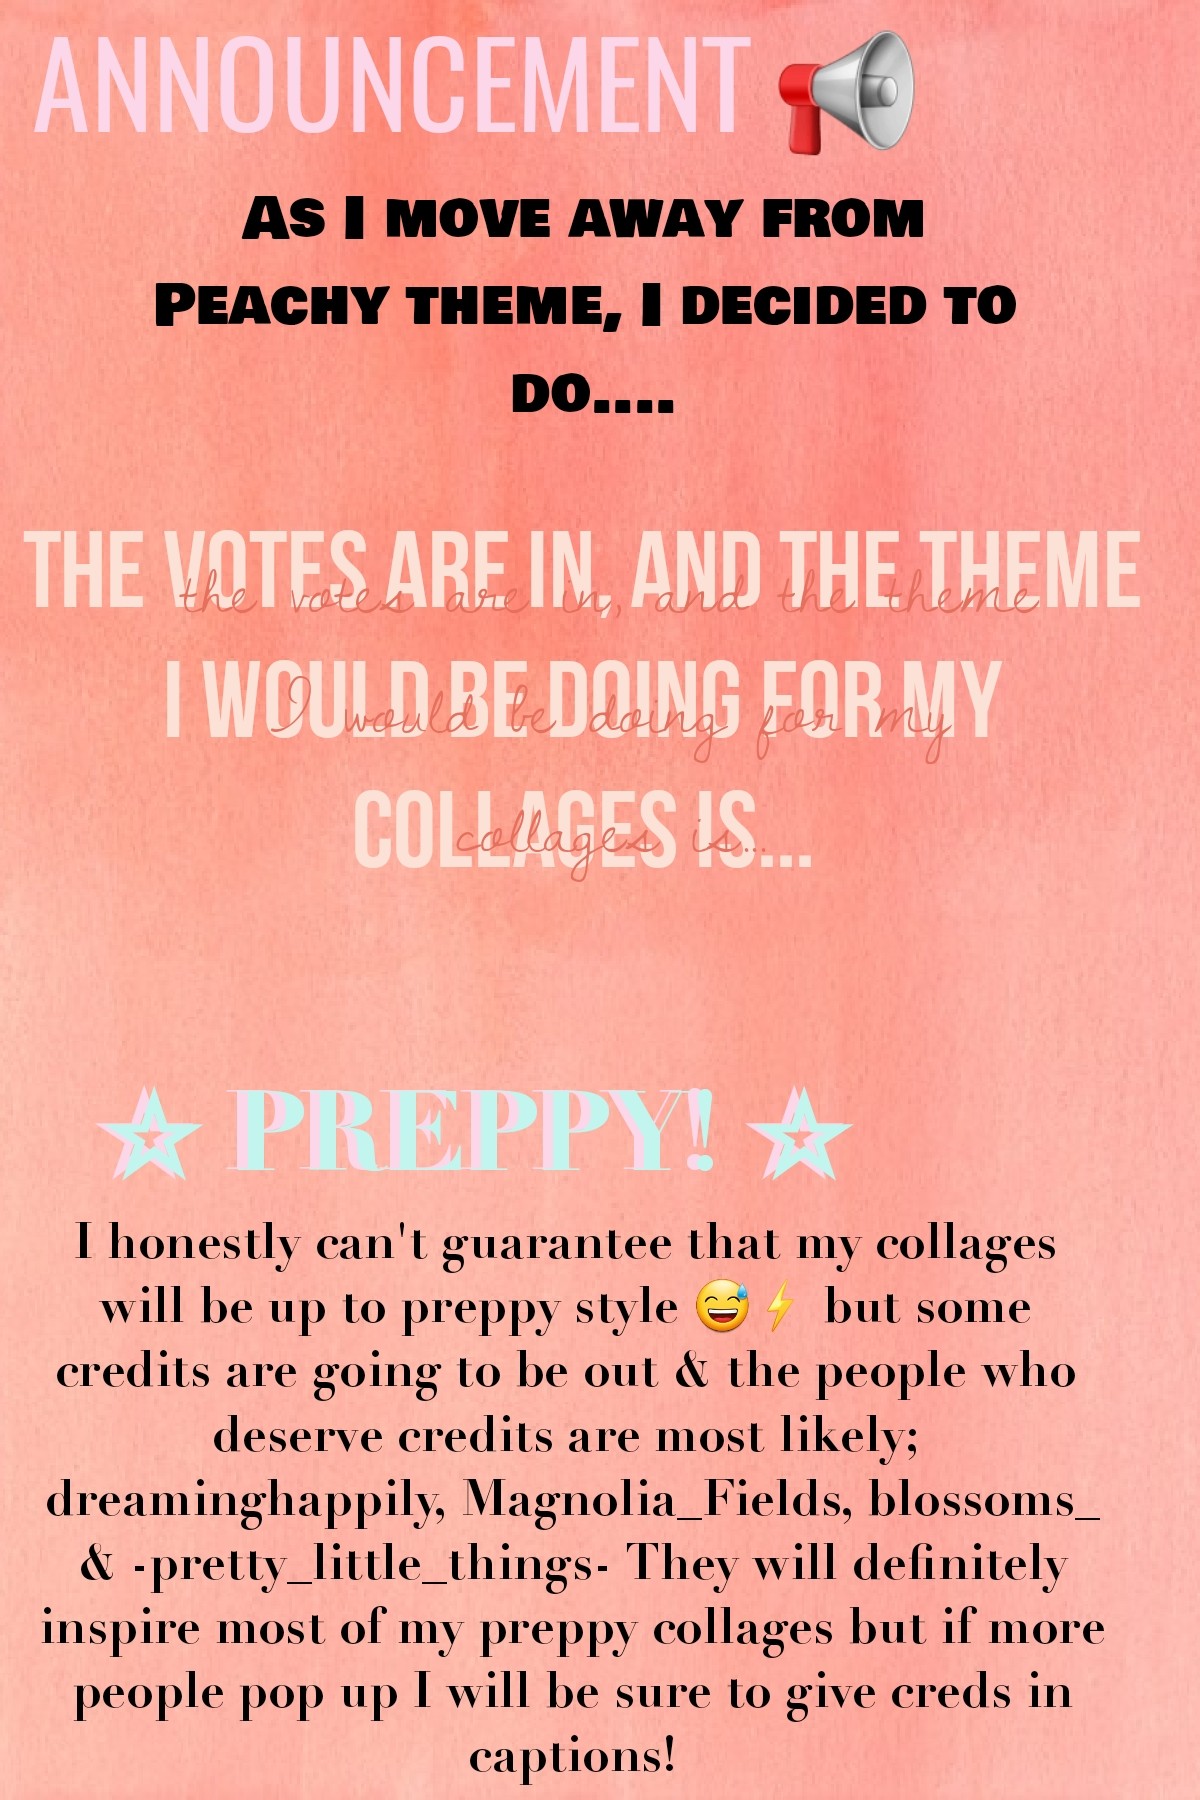         ⚡️ANNOUNCEMENT 📢 

   Preppy style? ⚡️😅 I hope my collages will be good enough for you, haha! Most likely creds are in the collage, hope you all have a fantastic day! 💕